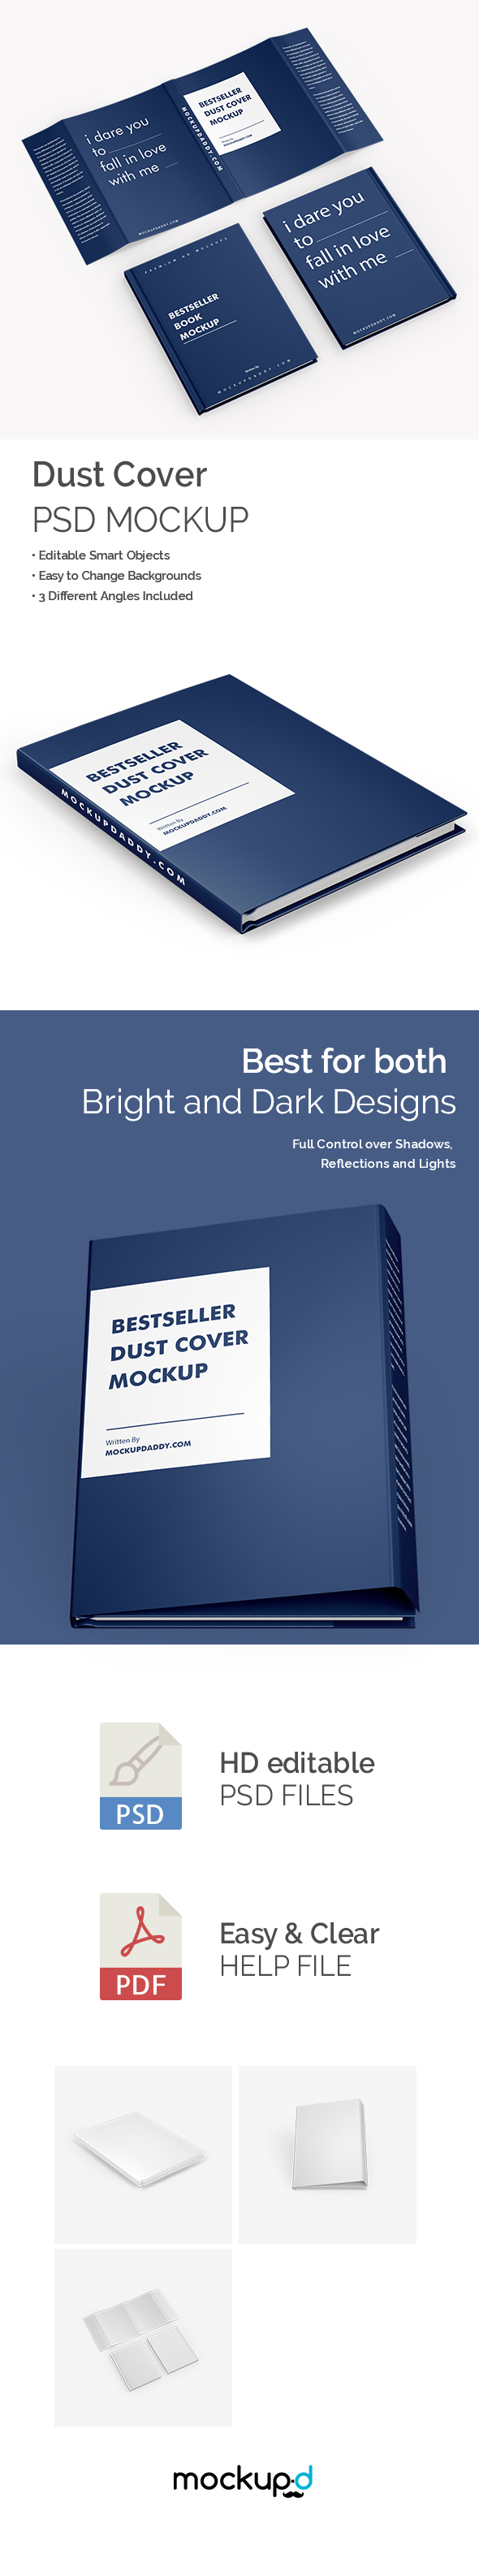 Universal Book Dust Cover Mockup Featured